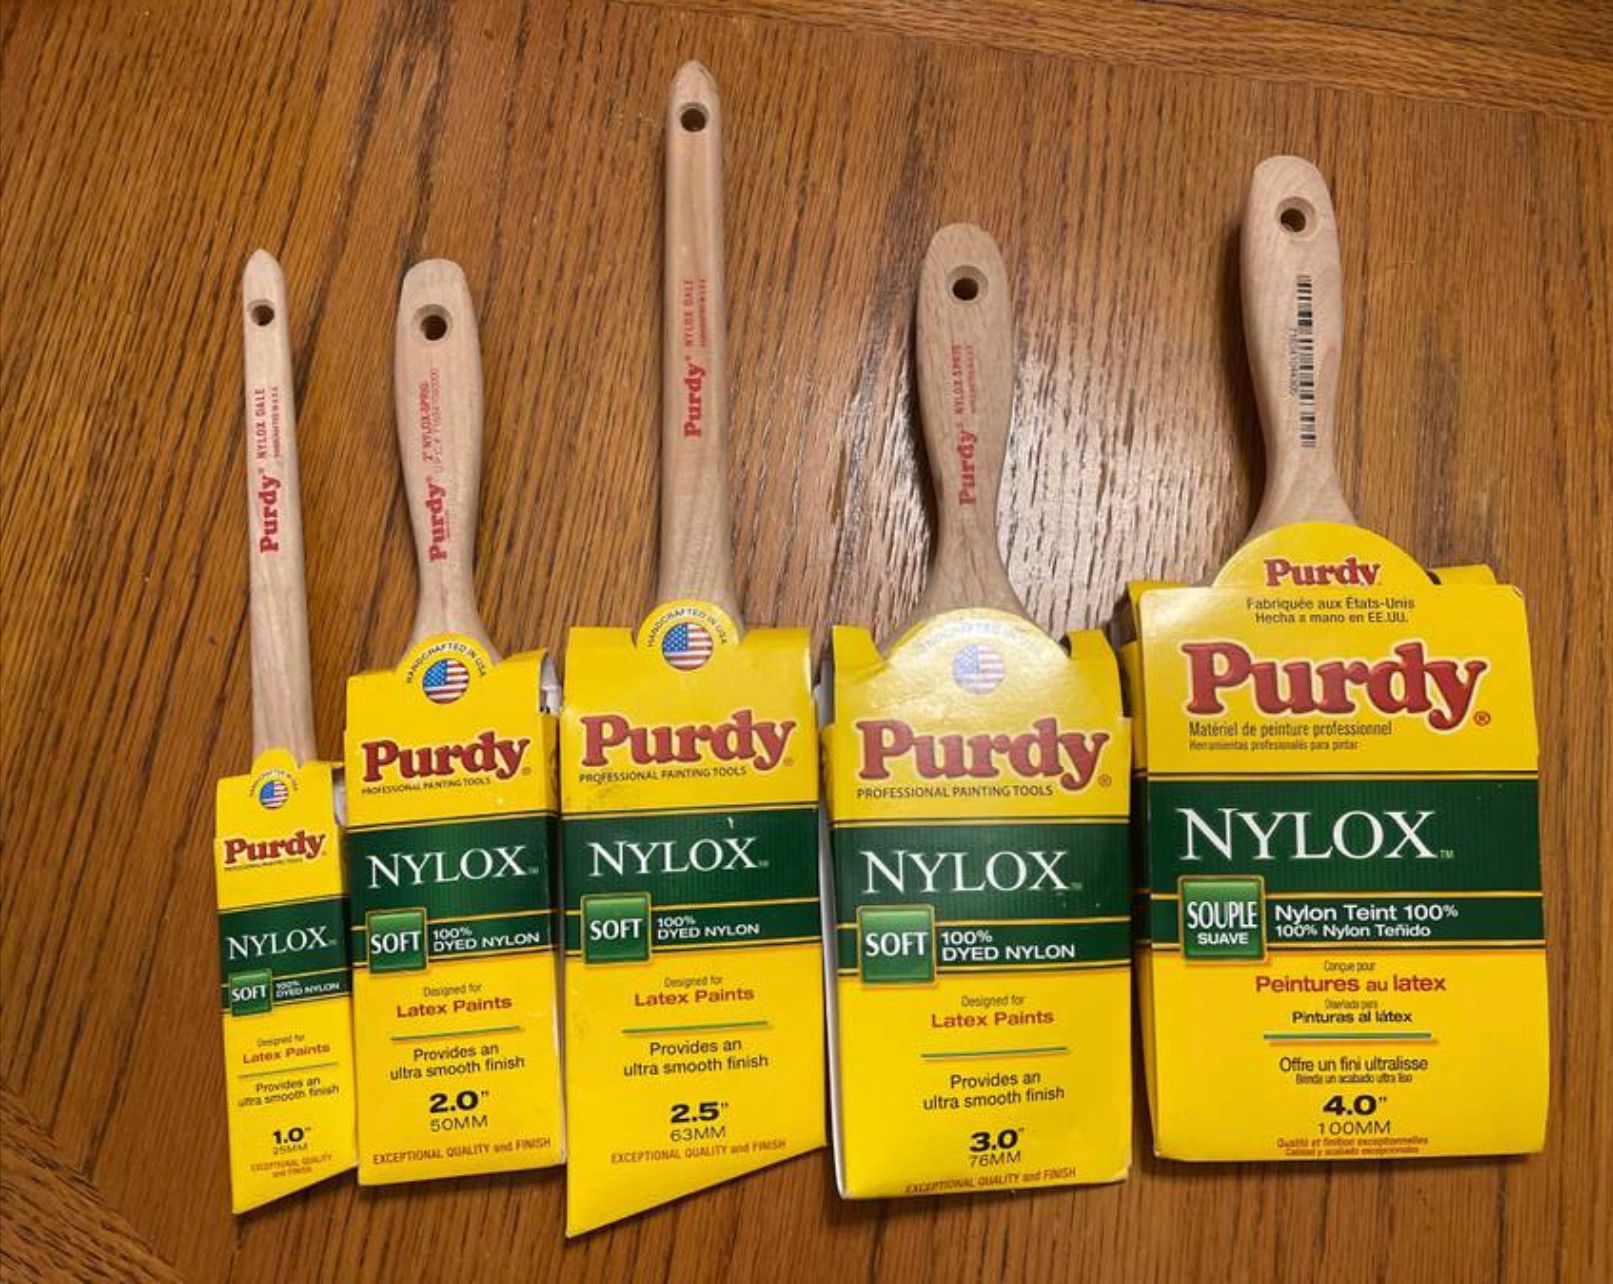 Lot of 5 new Prudy Nylox paint brushes